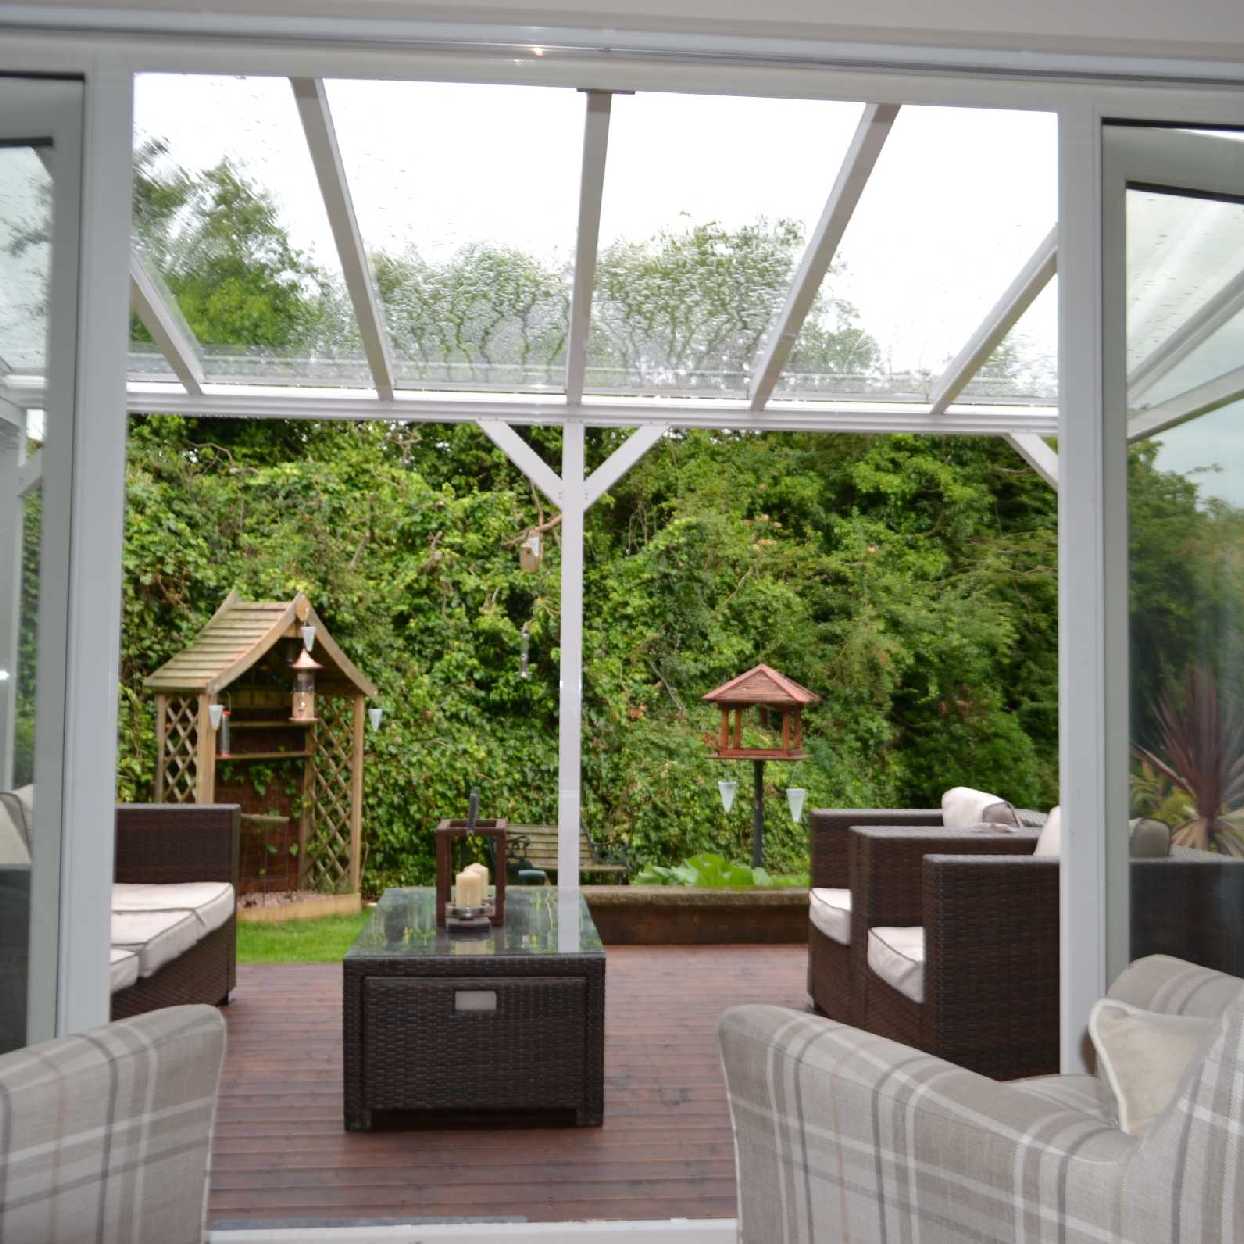 Great selection of Omega Smart Lean-To Canopy, White UNGLAZED for 6mm Glazing - 7.0m (W) x 1.5m (P), (4) Supporting Posts